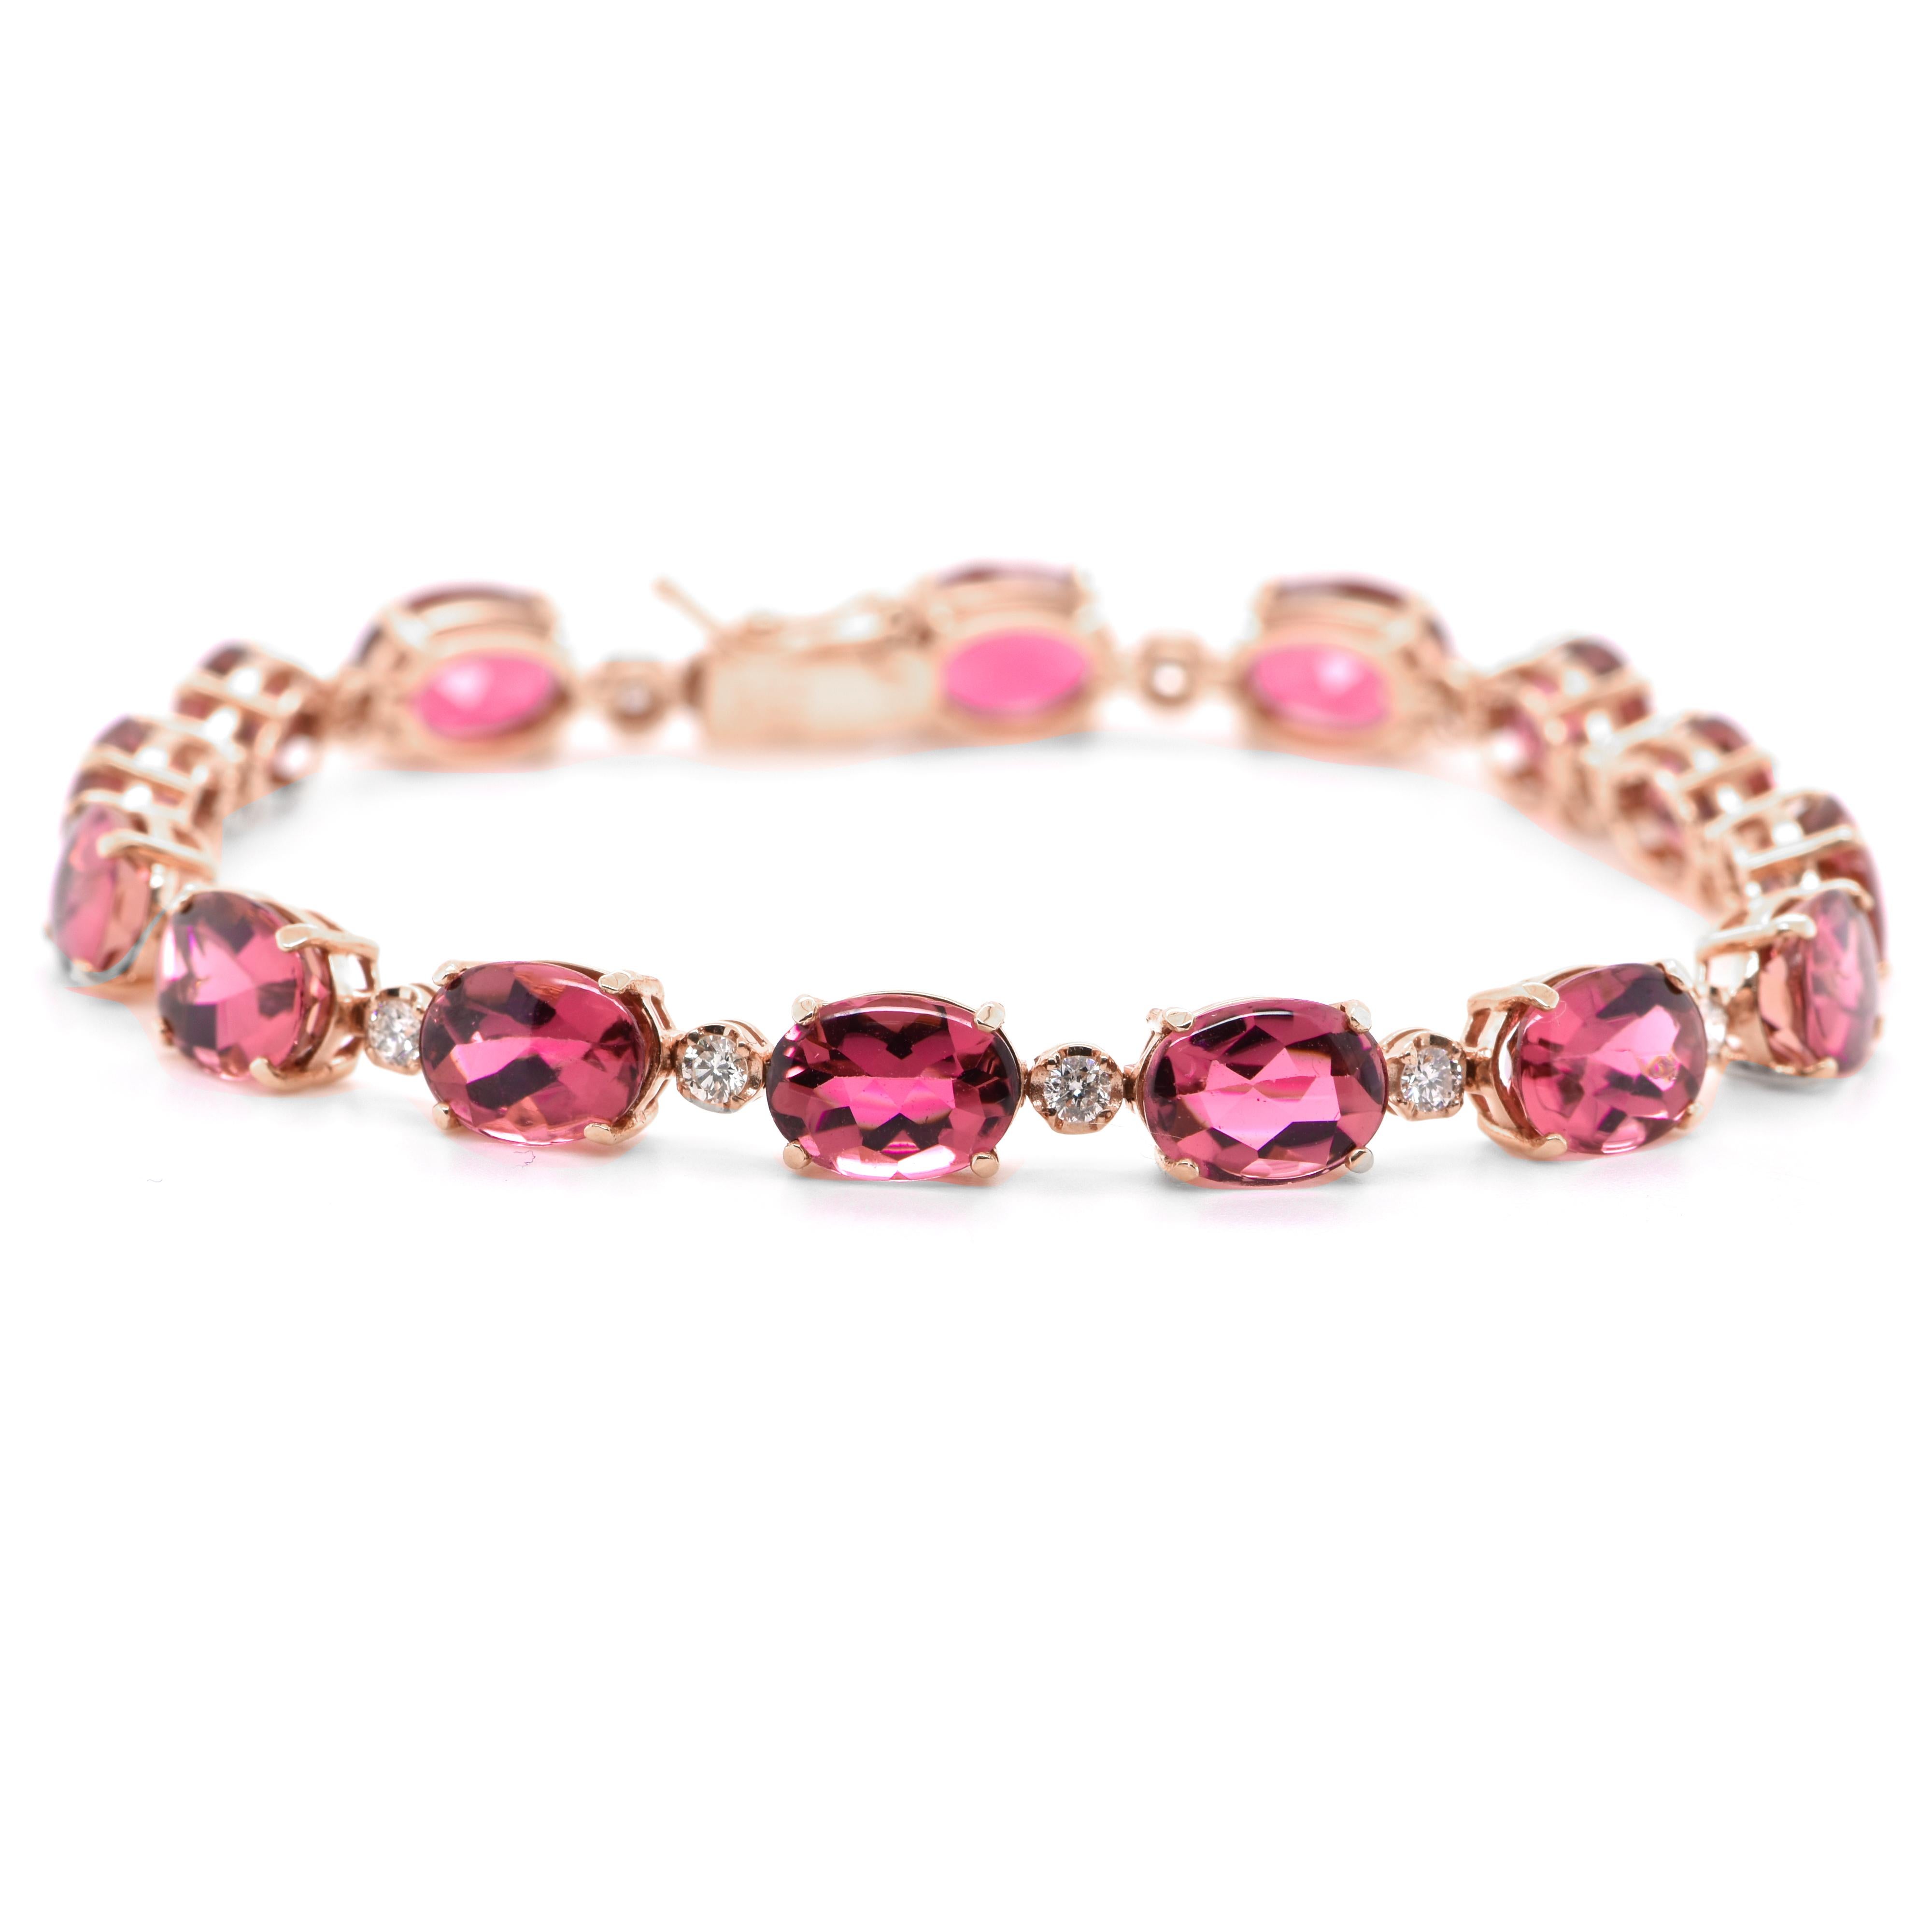 A stunning Bracelet featuring 20.80 Carats Natural Buffed-Top Cut Pink Tourmaline and 0.68 Carats of Diamond Accents set in 18 Karat Rose Gold. Tourmalines were first discovered by Spanish conquistadors in Brazil in 1500s. The name Tourmaline comes